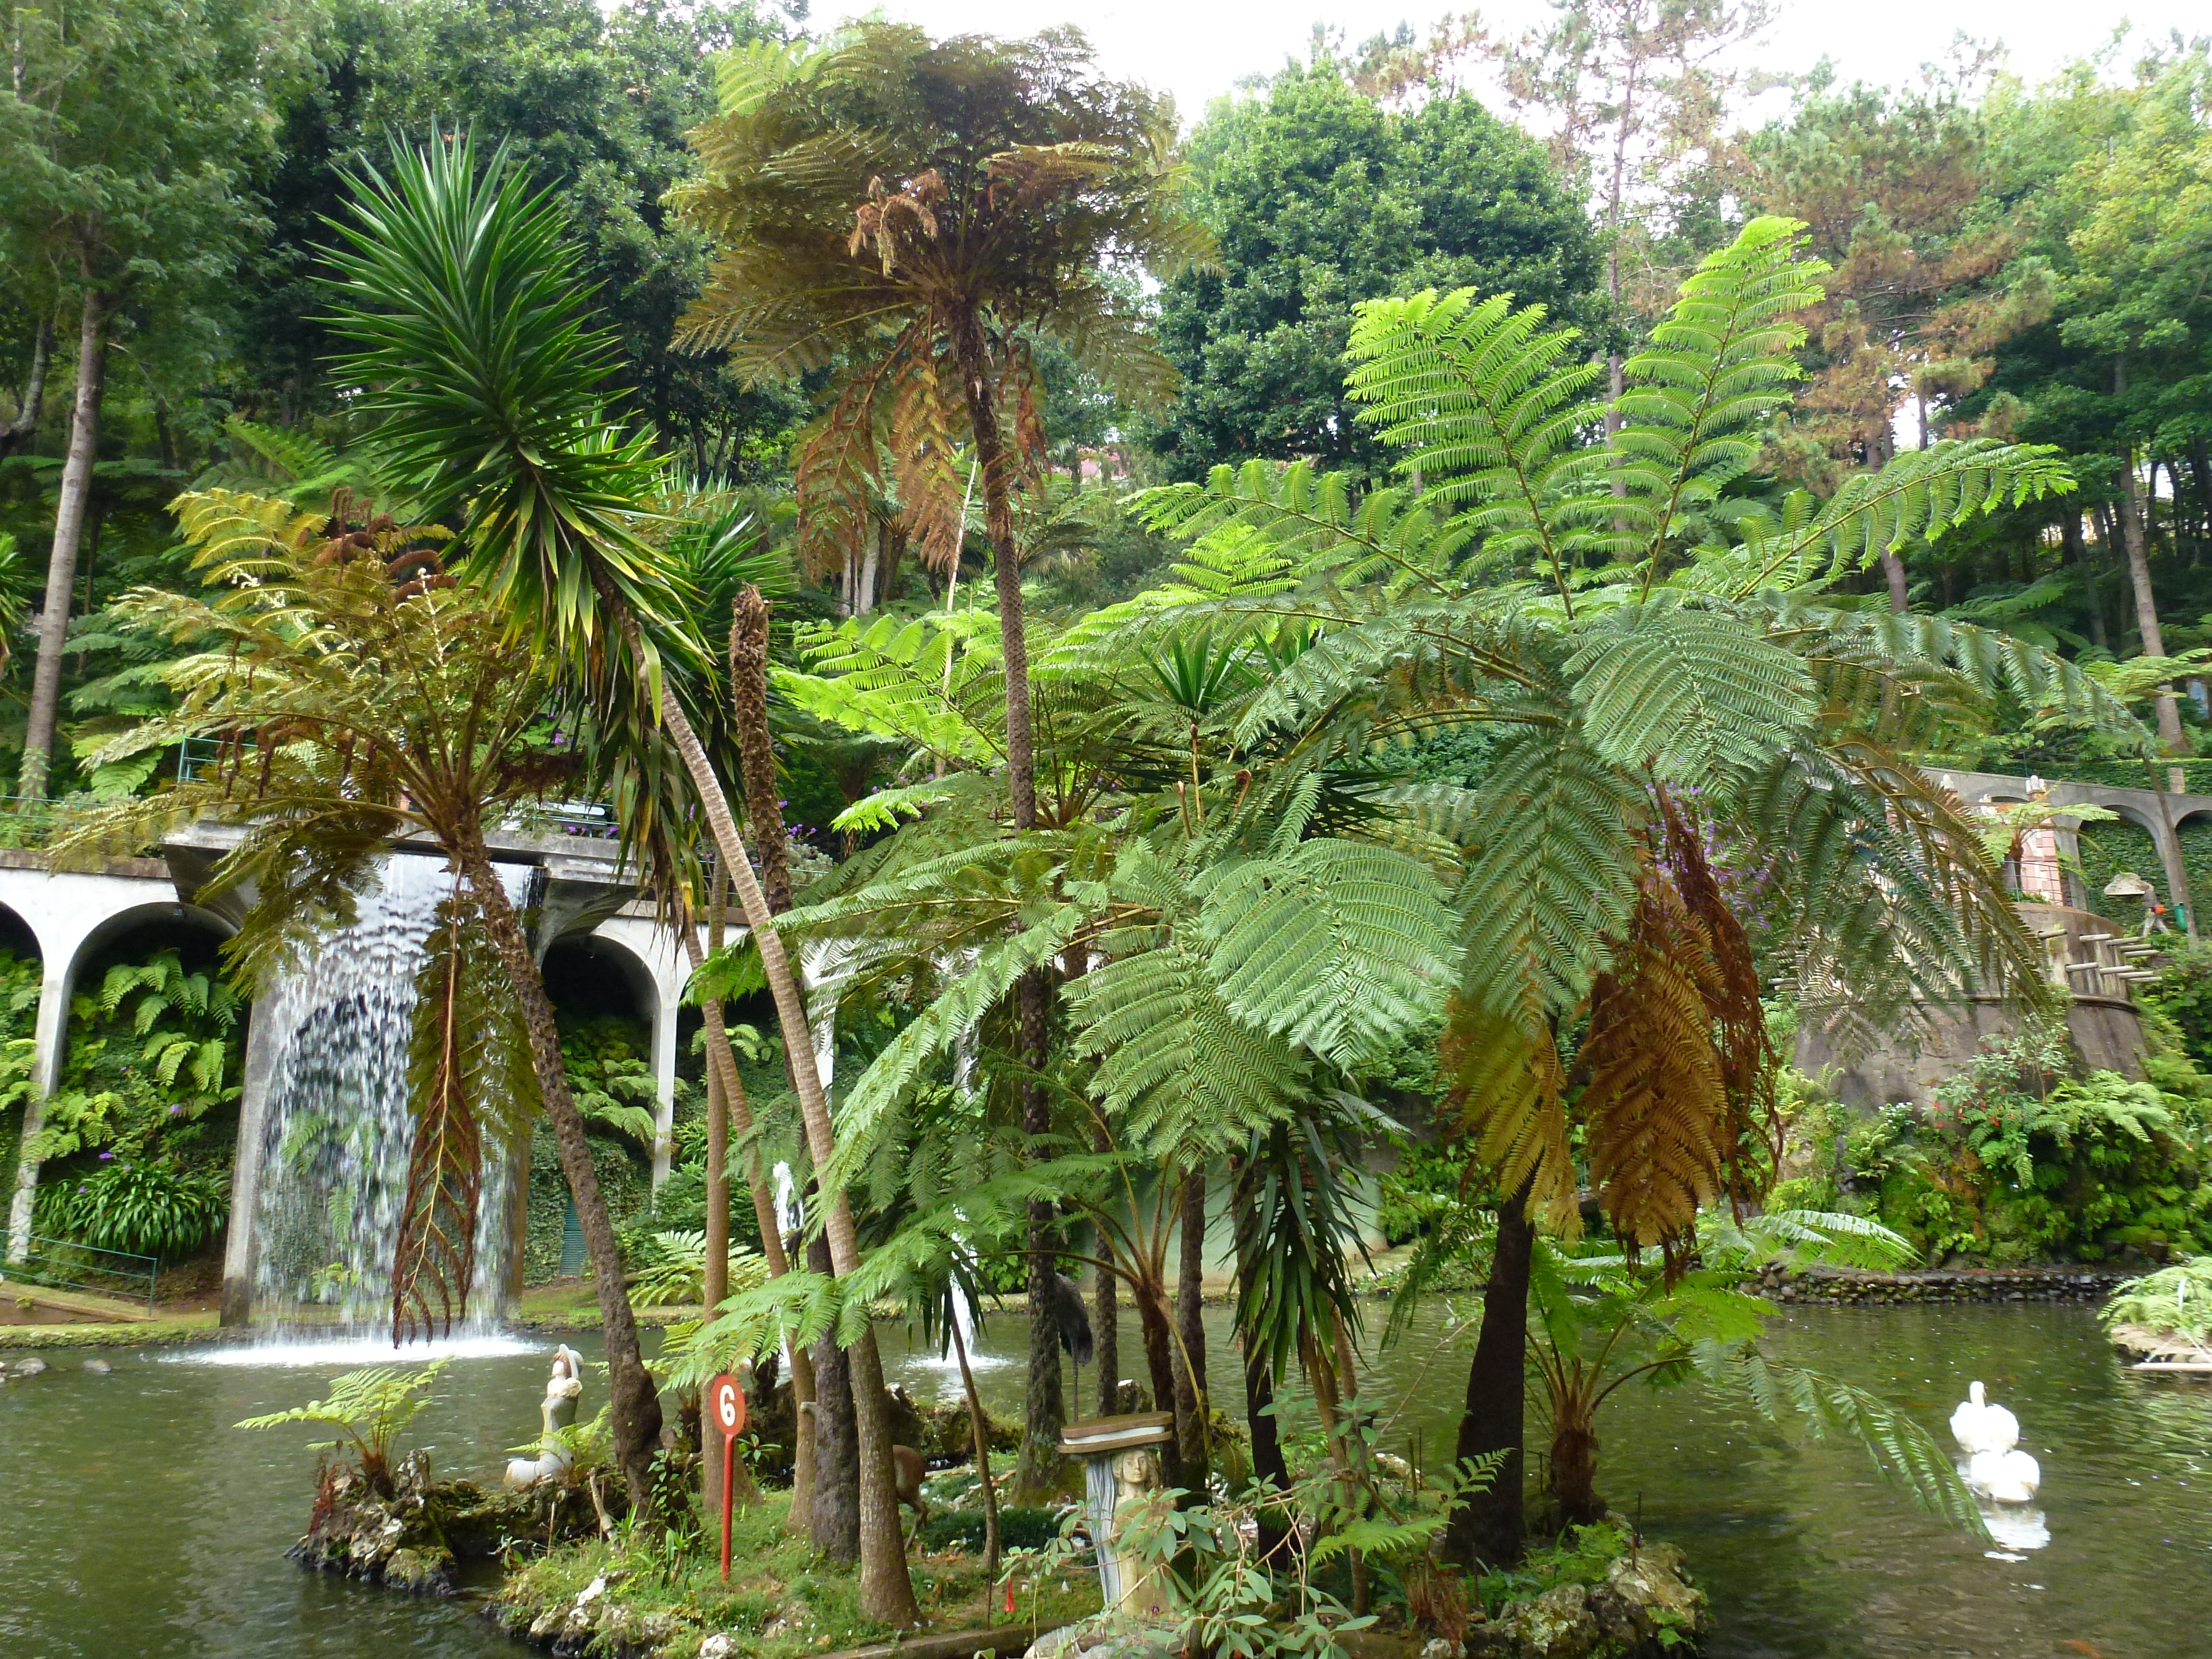 File:Monte Palace Tropical Garden.jpg - Wikimedia Commons